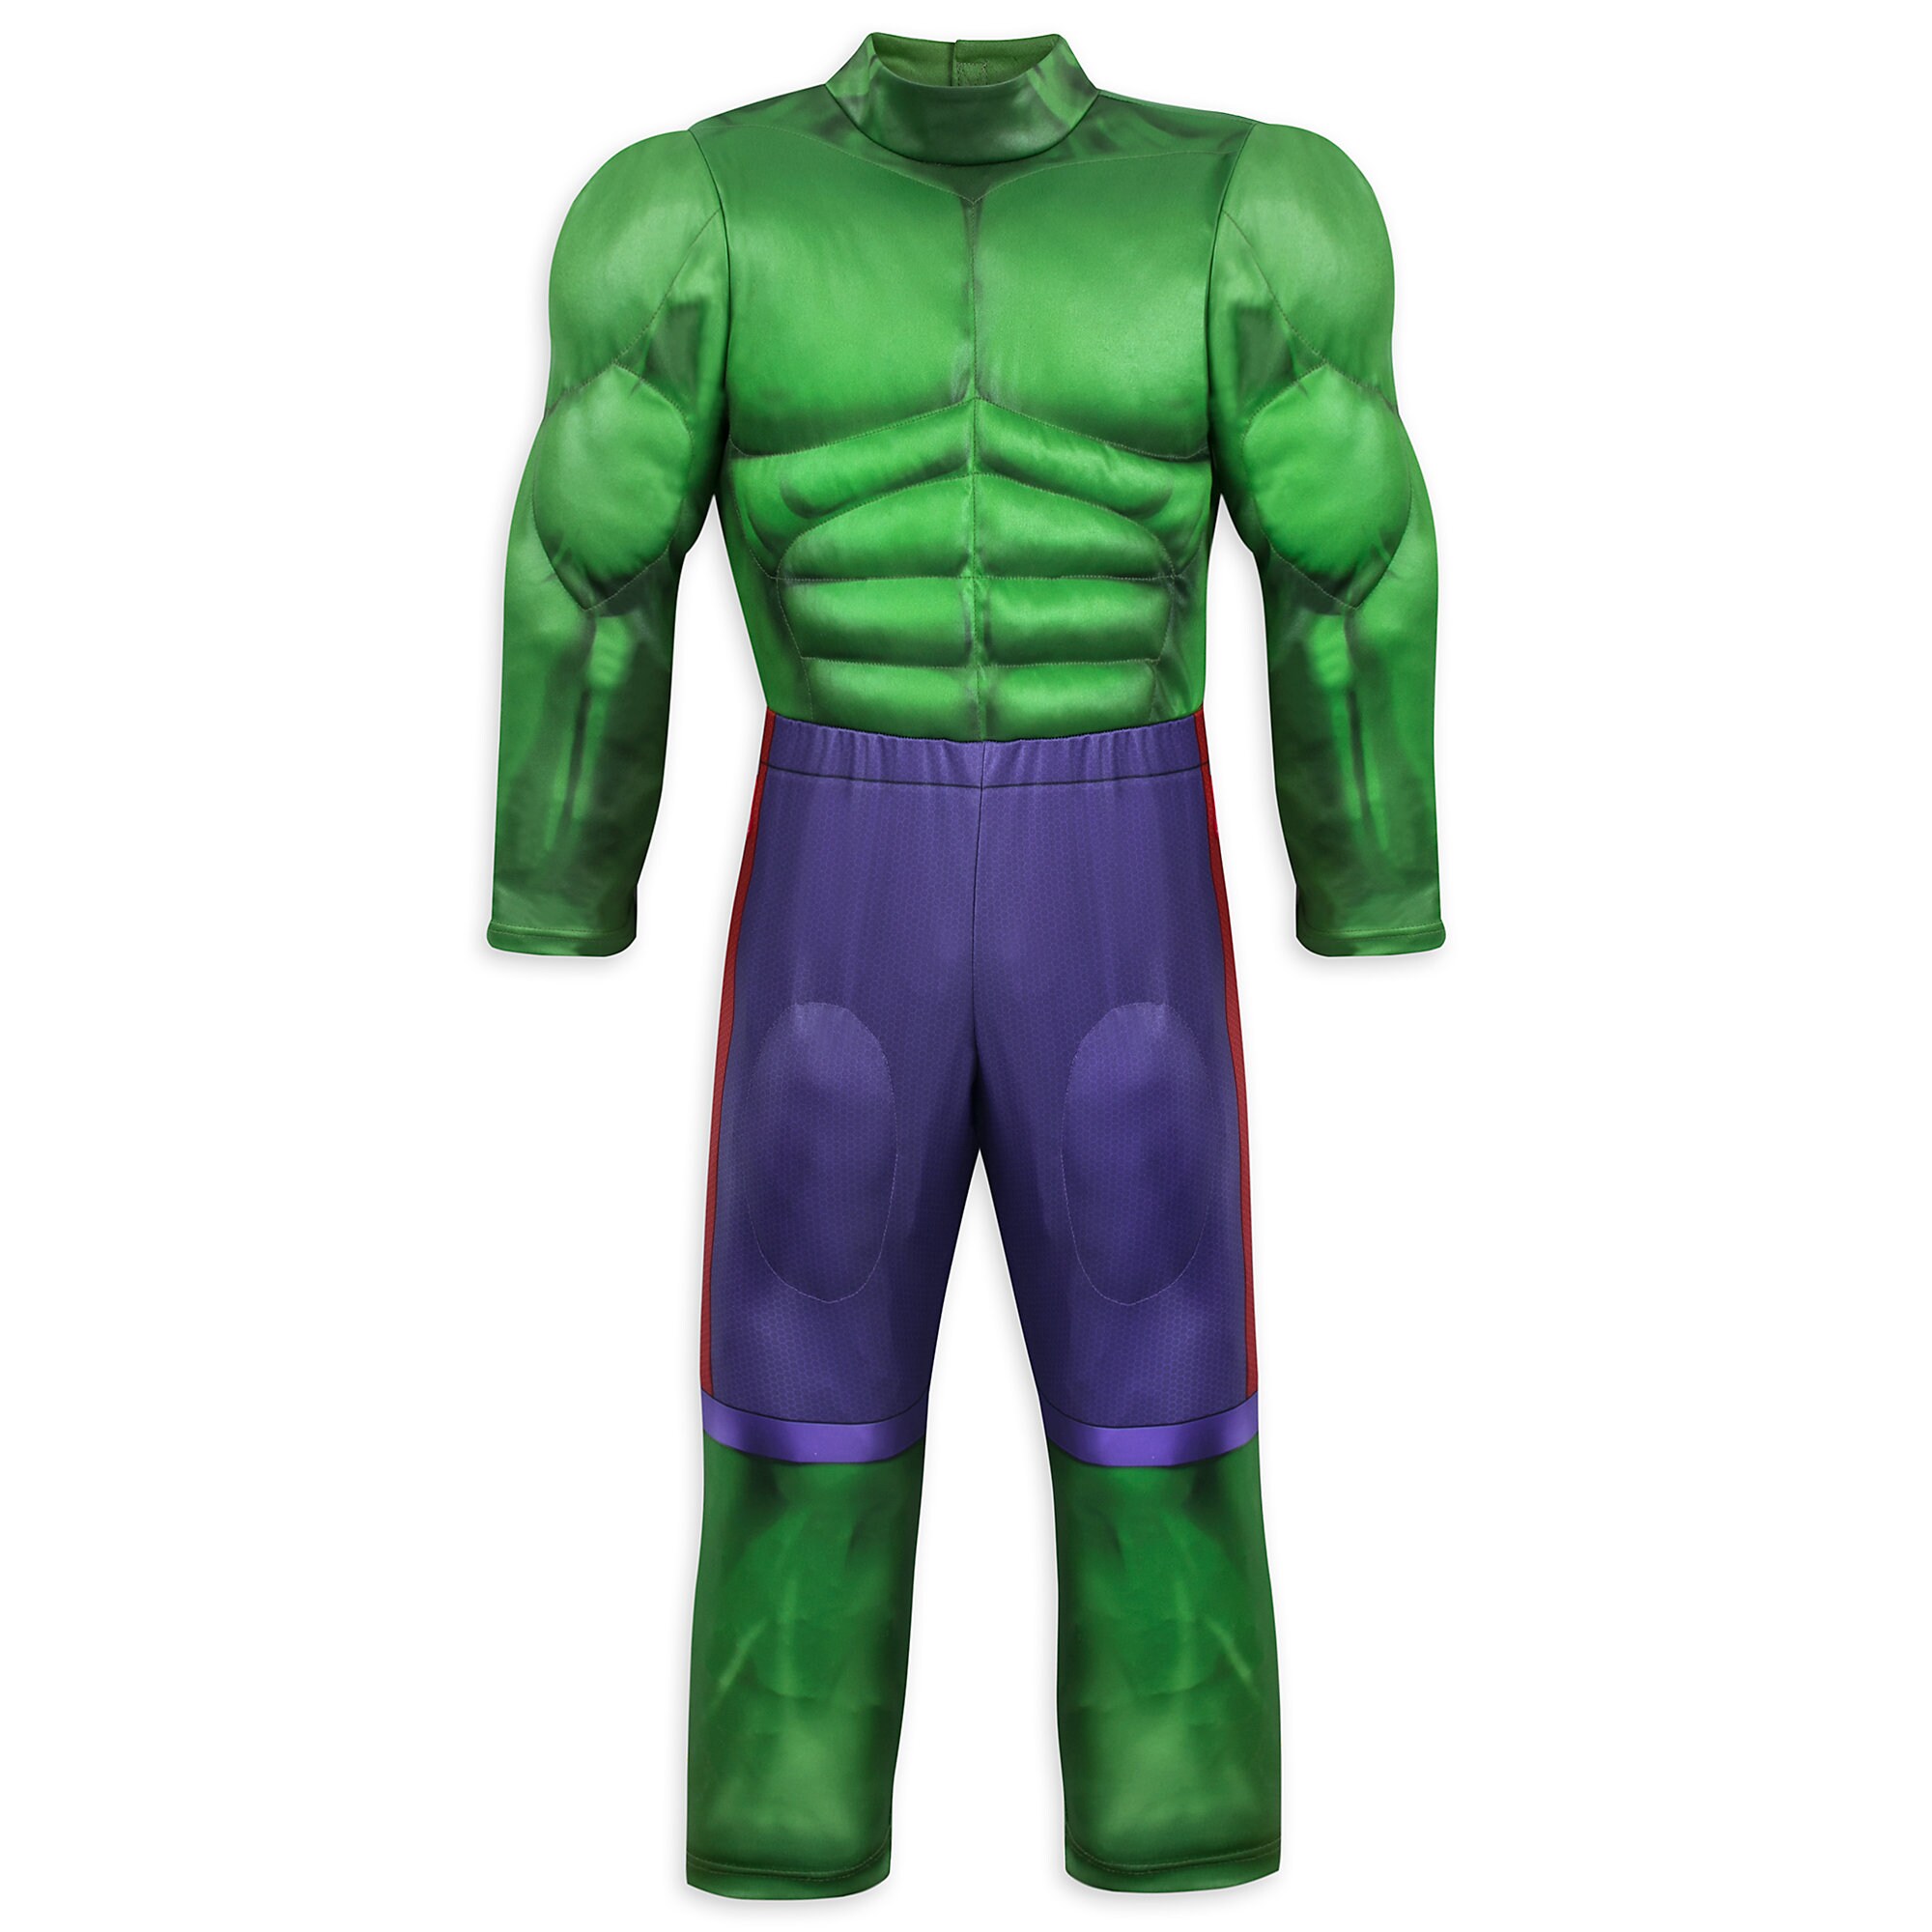 Hulk Costume for Kids available online – Dis Merchandise News